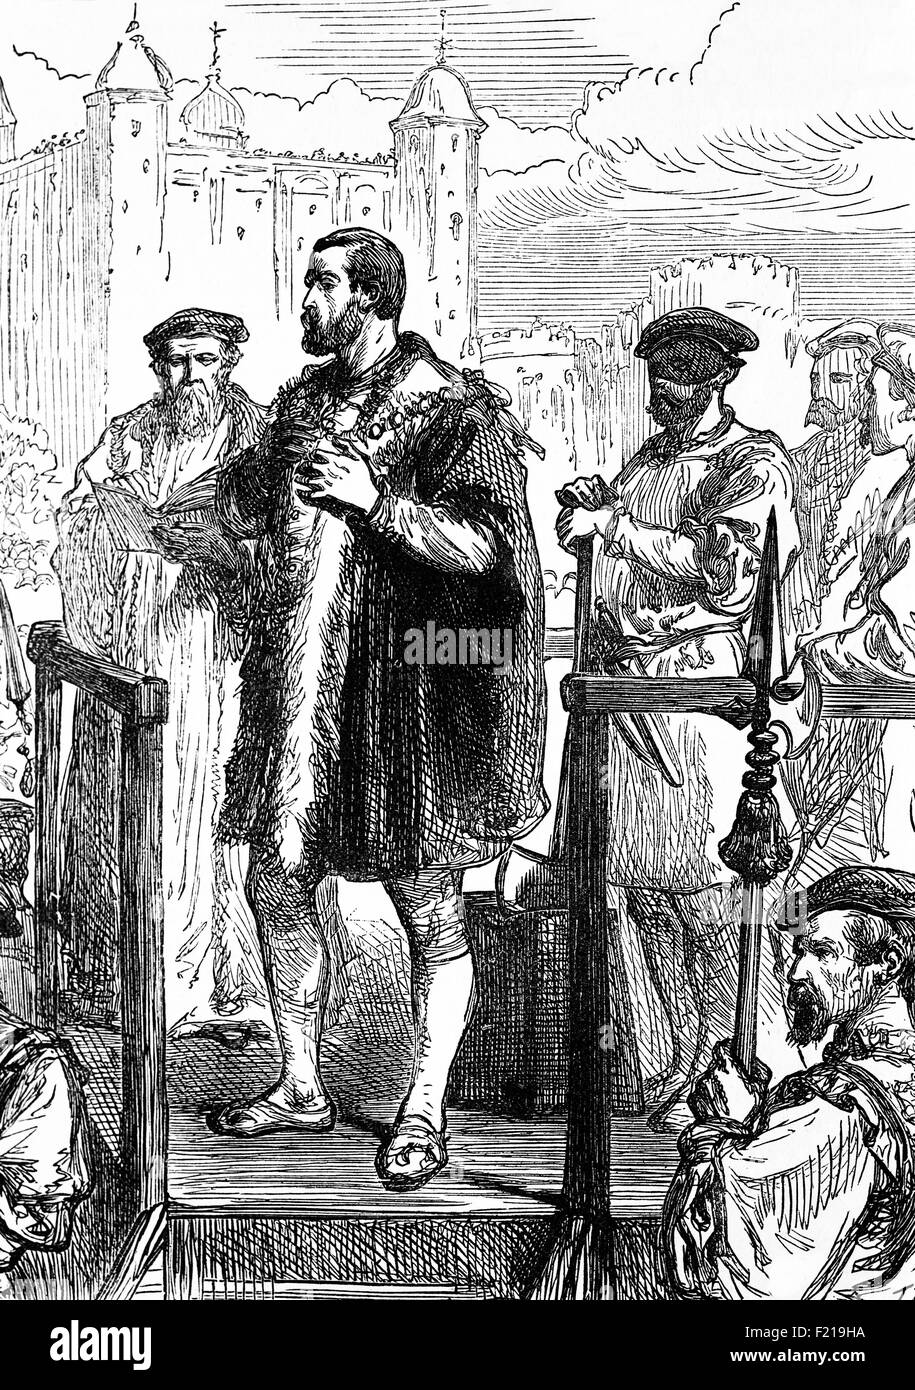 The Execution of Edward Stafford, 3rd Duke of Buckingham, (1478 – 1521), following his arrest for potentially treasonous actions by Henry VIII  in April 1521. He was executed on Tower Hill on 17 May 1521. Stock Photo